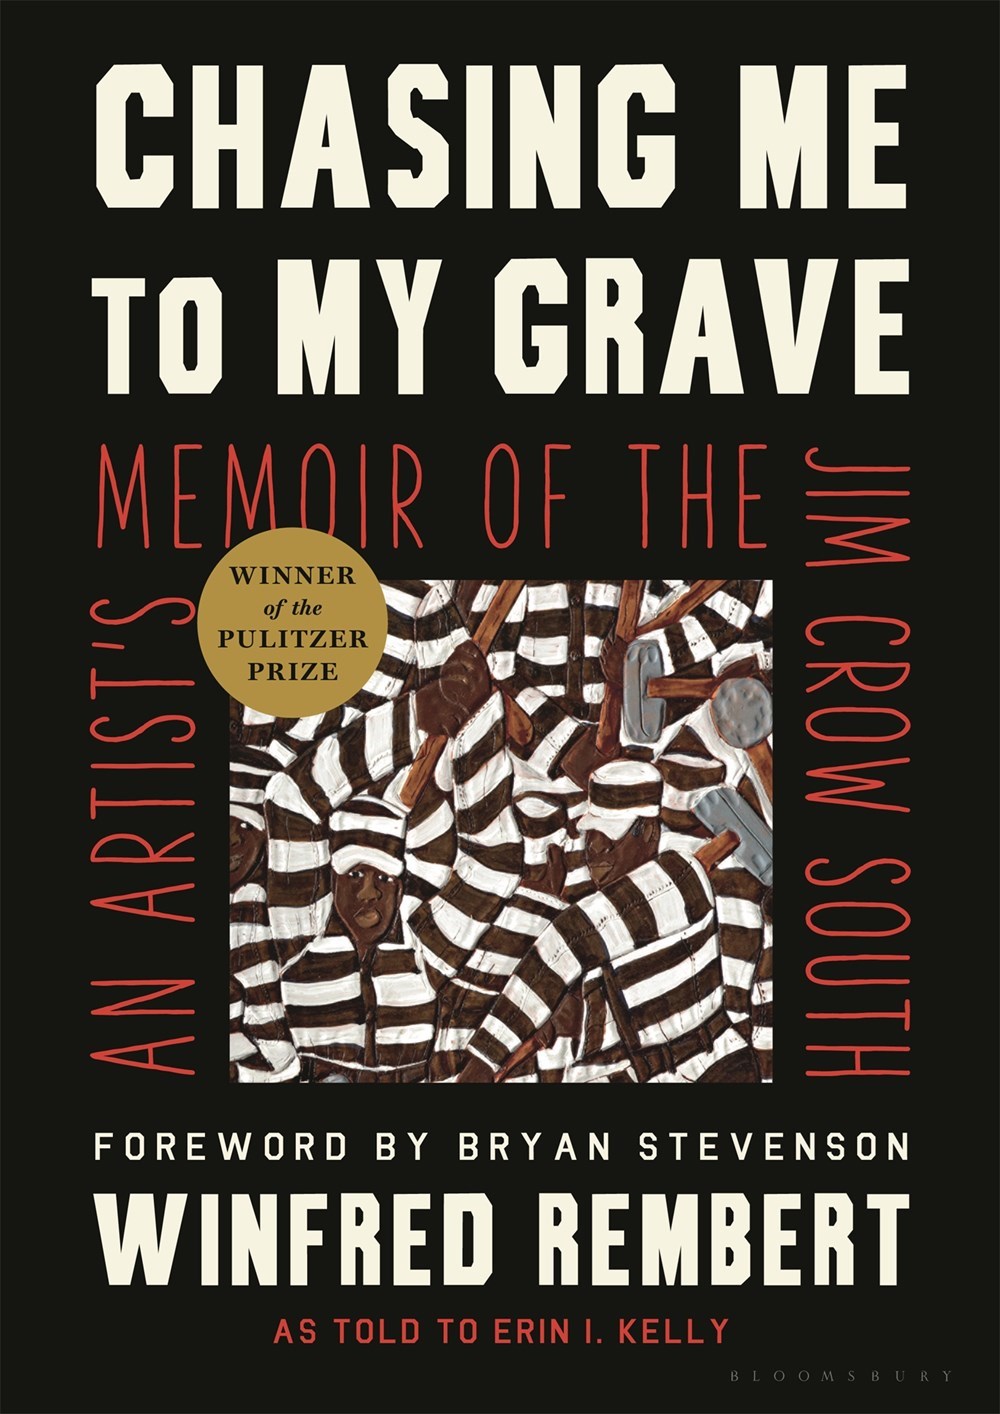 Chasing Me to My Grave An Artist's Memoir of the Jim Crow South